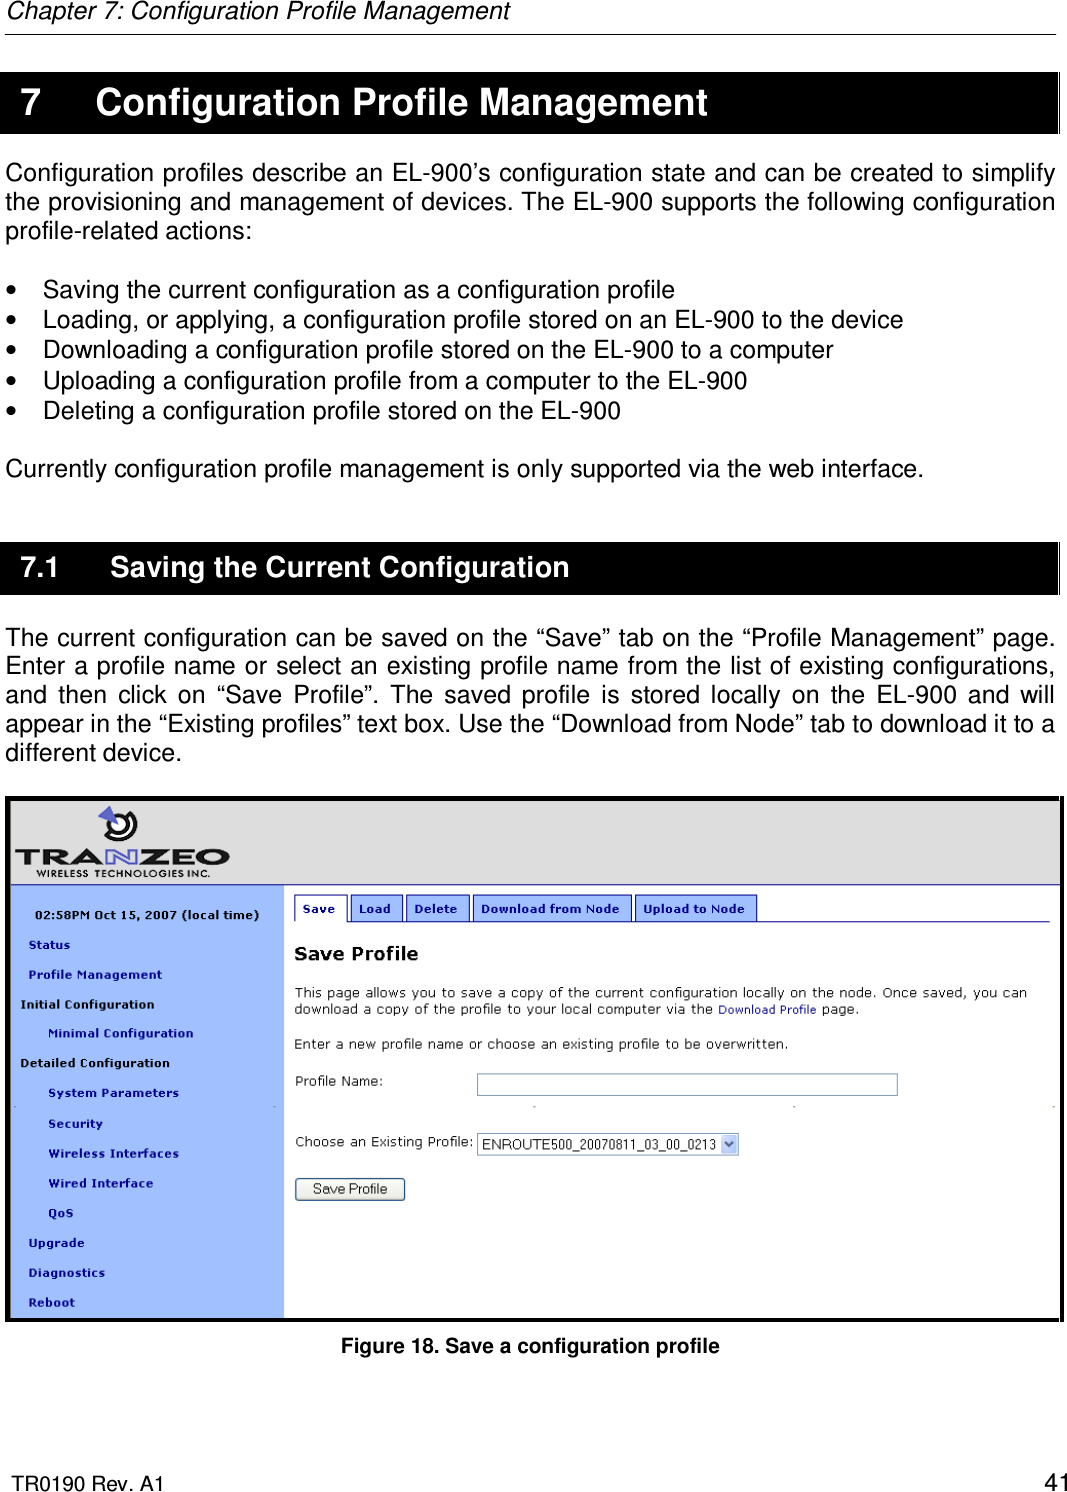 Chapter 7: Configuration Profile Management  TR0190 Rev. A1    41 7  Configuration Profile Management Configuration profiles describe an EL-900’s configuration state and can be created to simplify the provisioning and management of devices. The EL-900 supports the following configuration profile-related actions:  •  Saving the current configuration as a configuration profile •  Loading, or applying, a configuration profile stored on an EL-900 to the device •  Downloading a configuration profile stored on the EL-900 to a computer •  Uploading a configuration profile from a computer to the EL-900 •  Deleting a configuration profile stored on the EL-900  Currently configuration profile management is only supported via the web interface.  7.1  Saving the Current Configuration The current configuration can be saved on the “Save” tab on the “Profile Management” page. Enter a profile name or select an existing profile name from the list of existing configurations, and  then  click  on  “Save  Profile”.  The  saved  profile  is  stored  locally  on  the  EL-900  and  will appear in the “Existing profiles” text box. Use the “Download from Node” tab to download it to a different device.   Figure 18. Save a configuration profile 